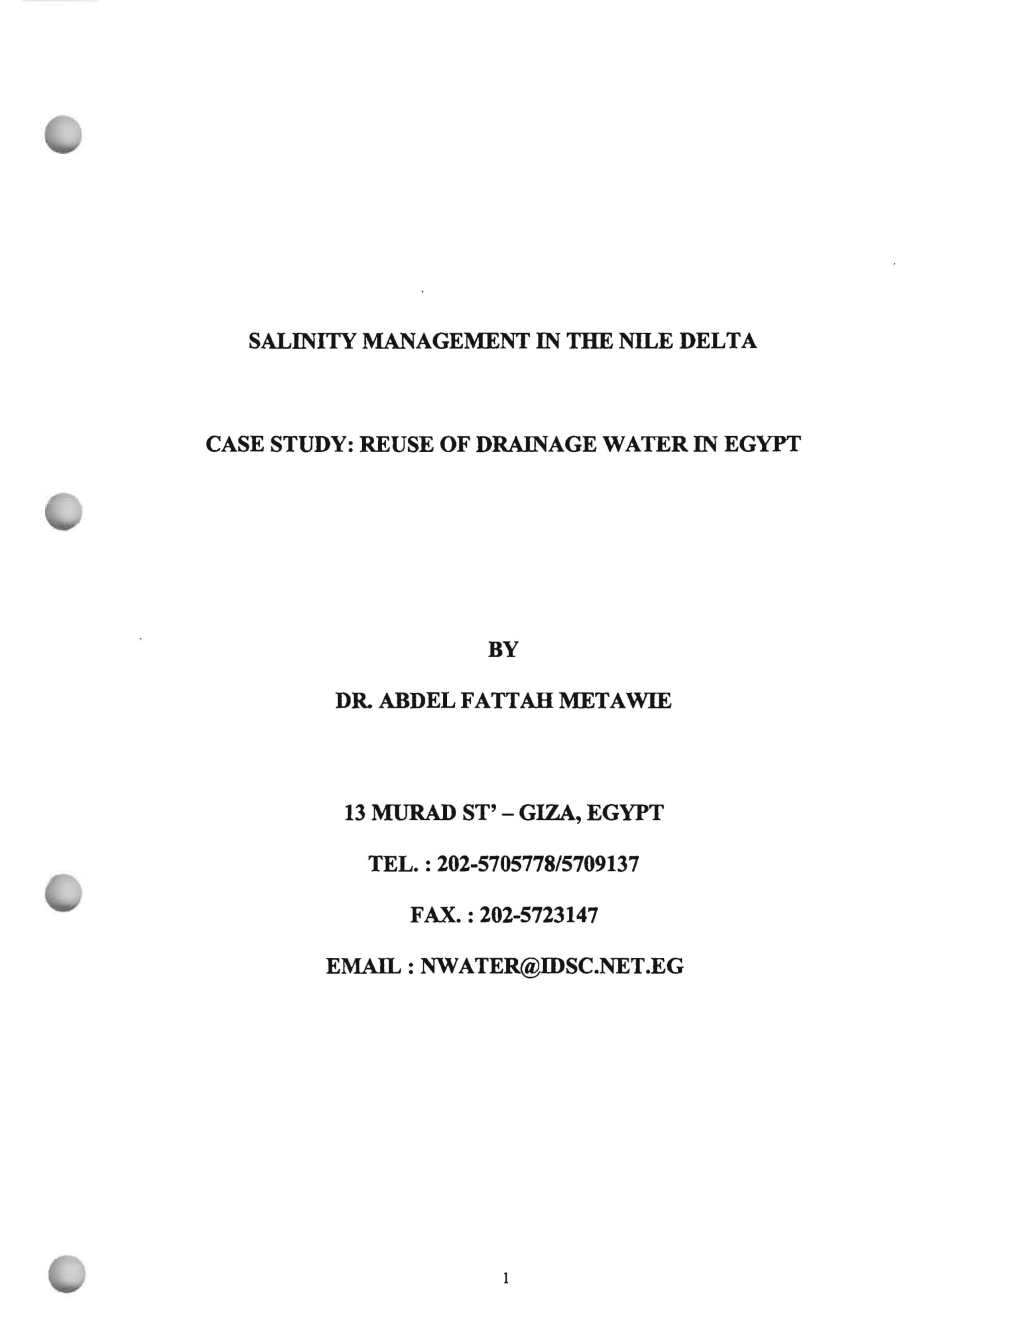 Salinity Management in the Nile Delta Case Study: Reuse of Drainage Water